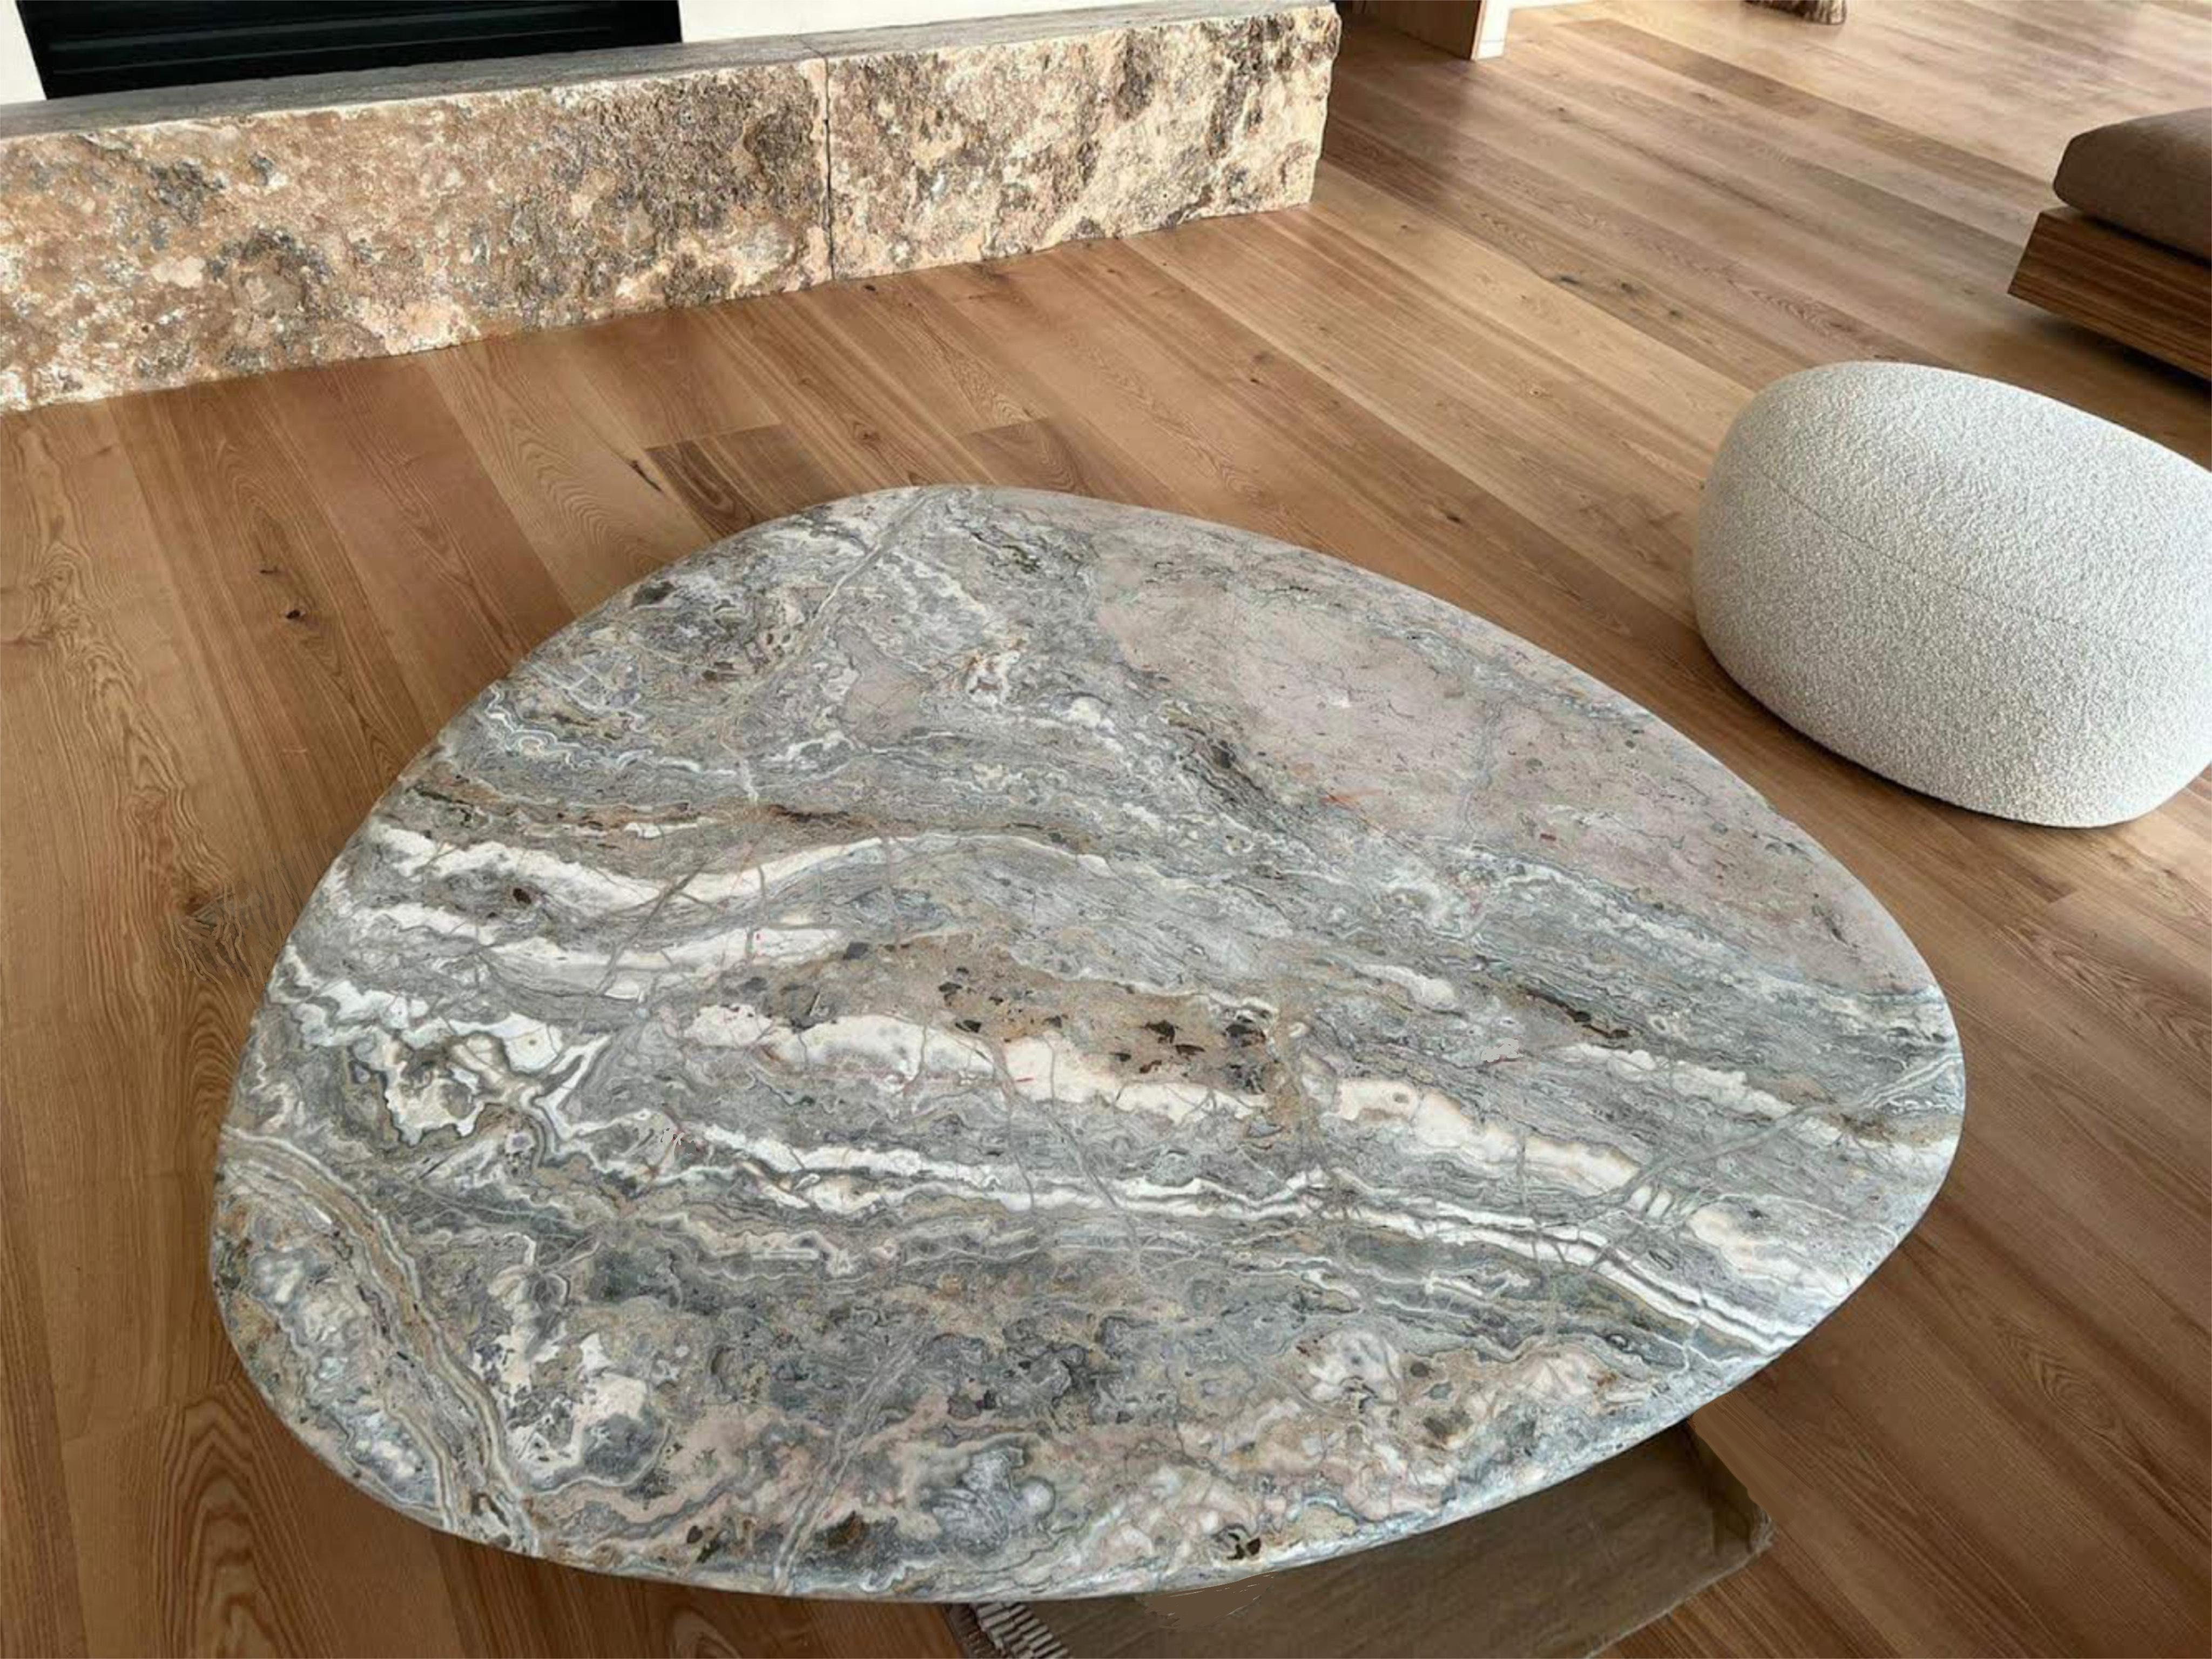 Tinatin Kilaberidze
Skimming Stone Coffee Table, 2022
Terra Onyx Stone top, legs in medium stained wood
140 x 140 x 140 cm
63 x 63 x 63 in
11.5 in overall H (12.5 OH possible), 2.75 slab H at edges , 8.75 leg H 
Thickness in the middle of the slab